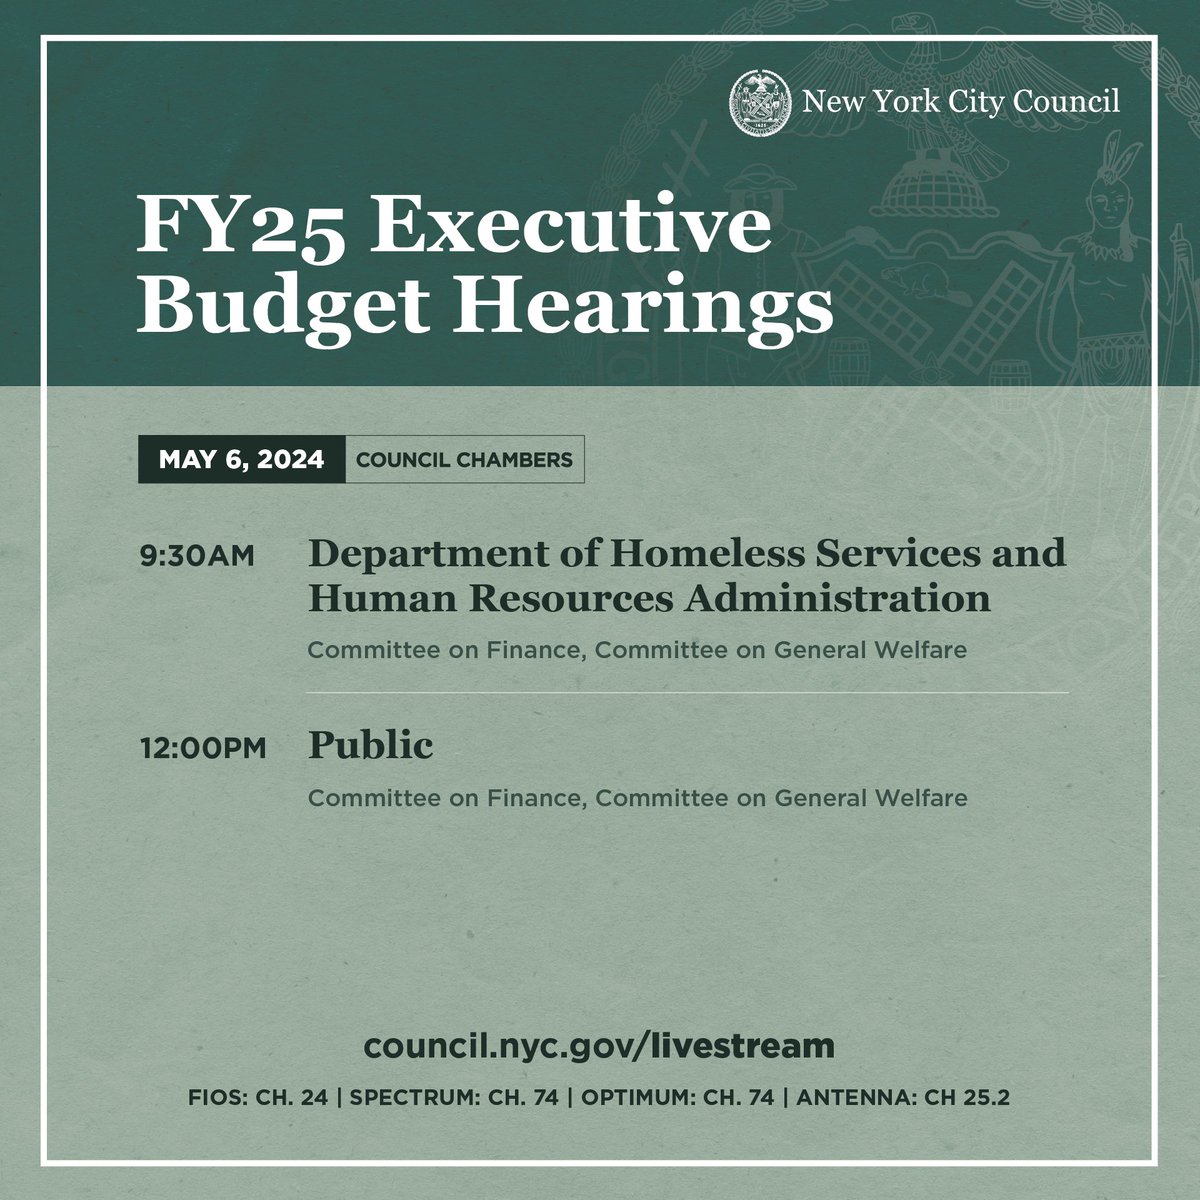 Happy Executive Budget Hearings season to all who celebrate! Tune in on Monday for the first hearing about @nycmayor’s Executive Budget for FY25, hosted jointly by the Committees on Finance and General Welfare. 📺 Watch live: council.nyc.gov/livestream/